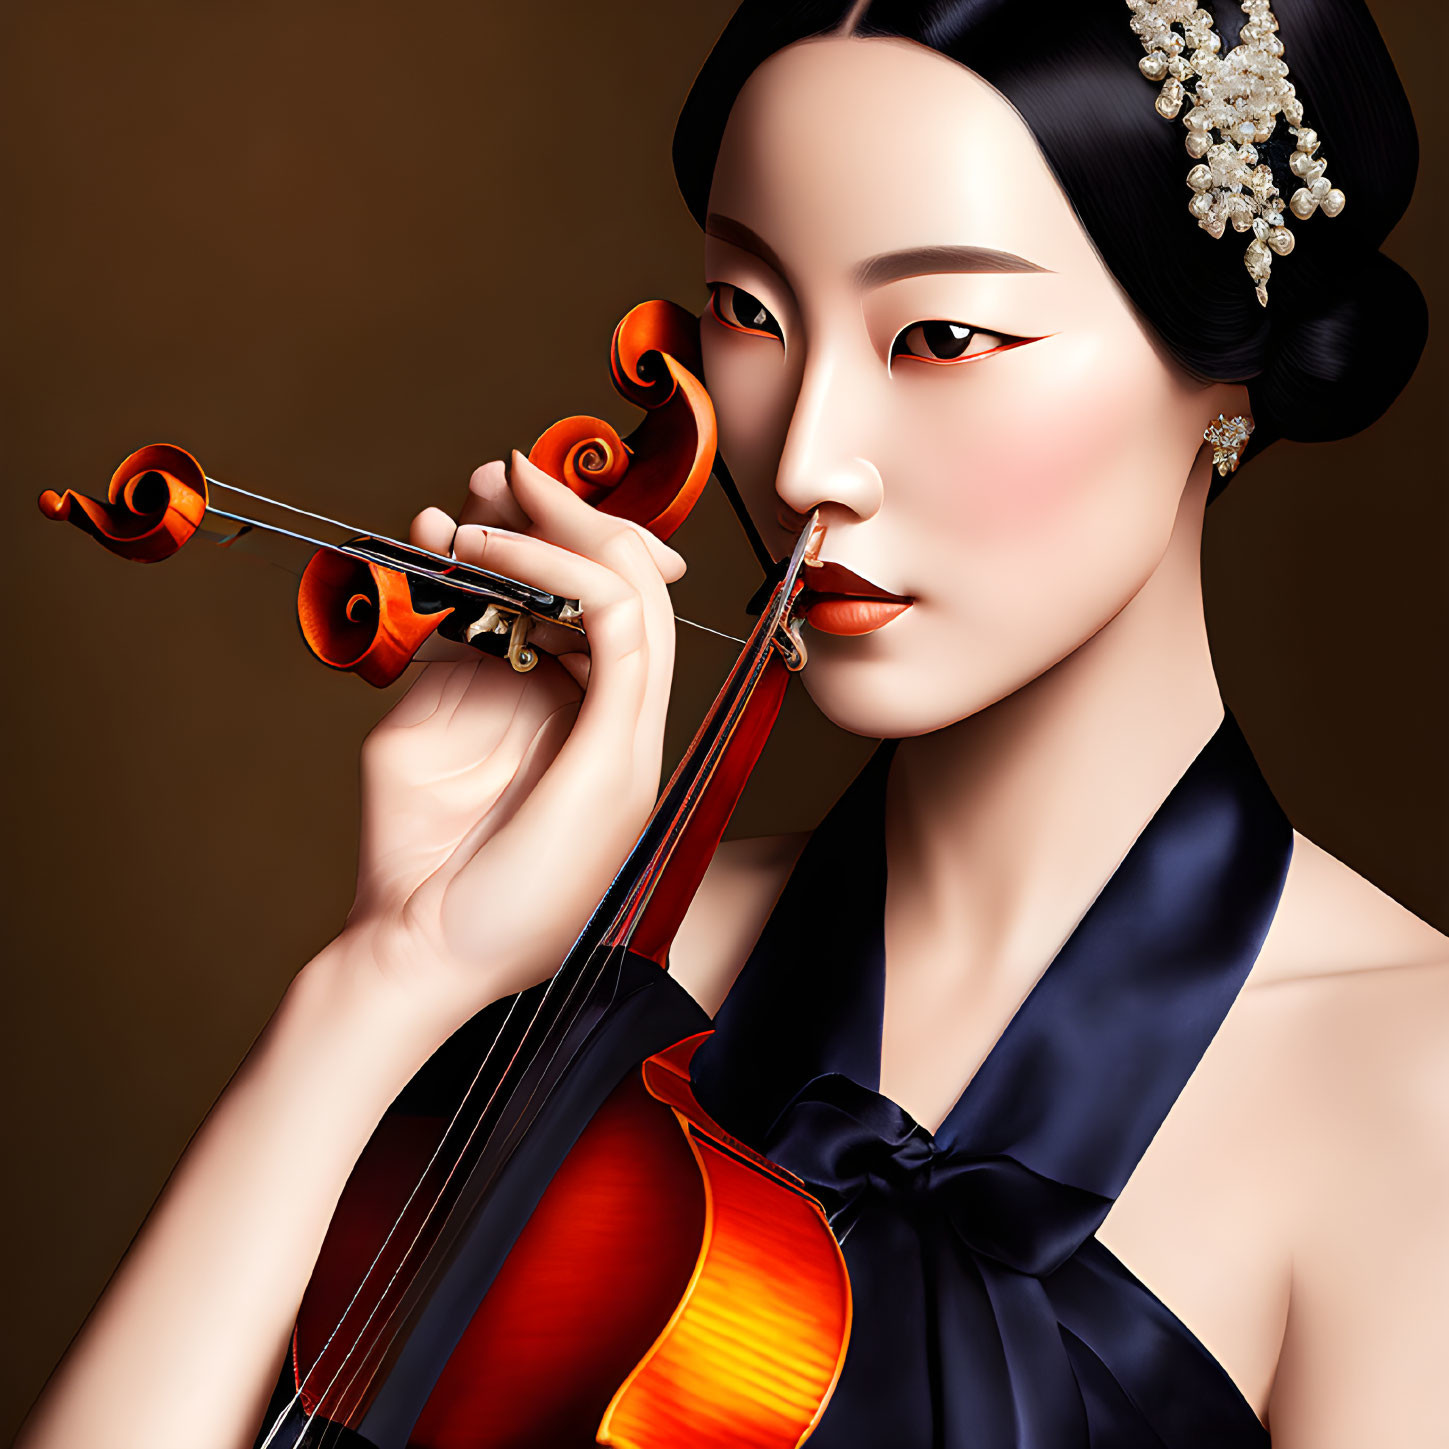 Elegant woman playing violin in black dress with pearl hair accessory